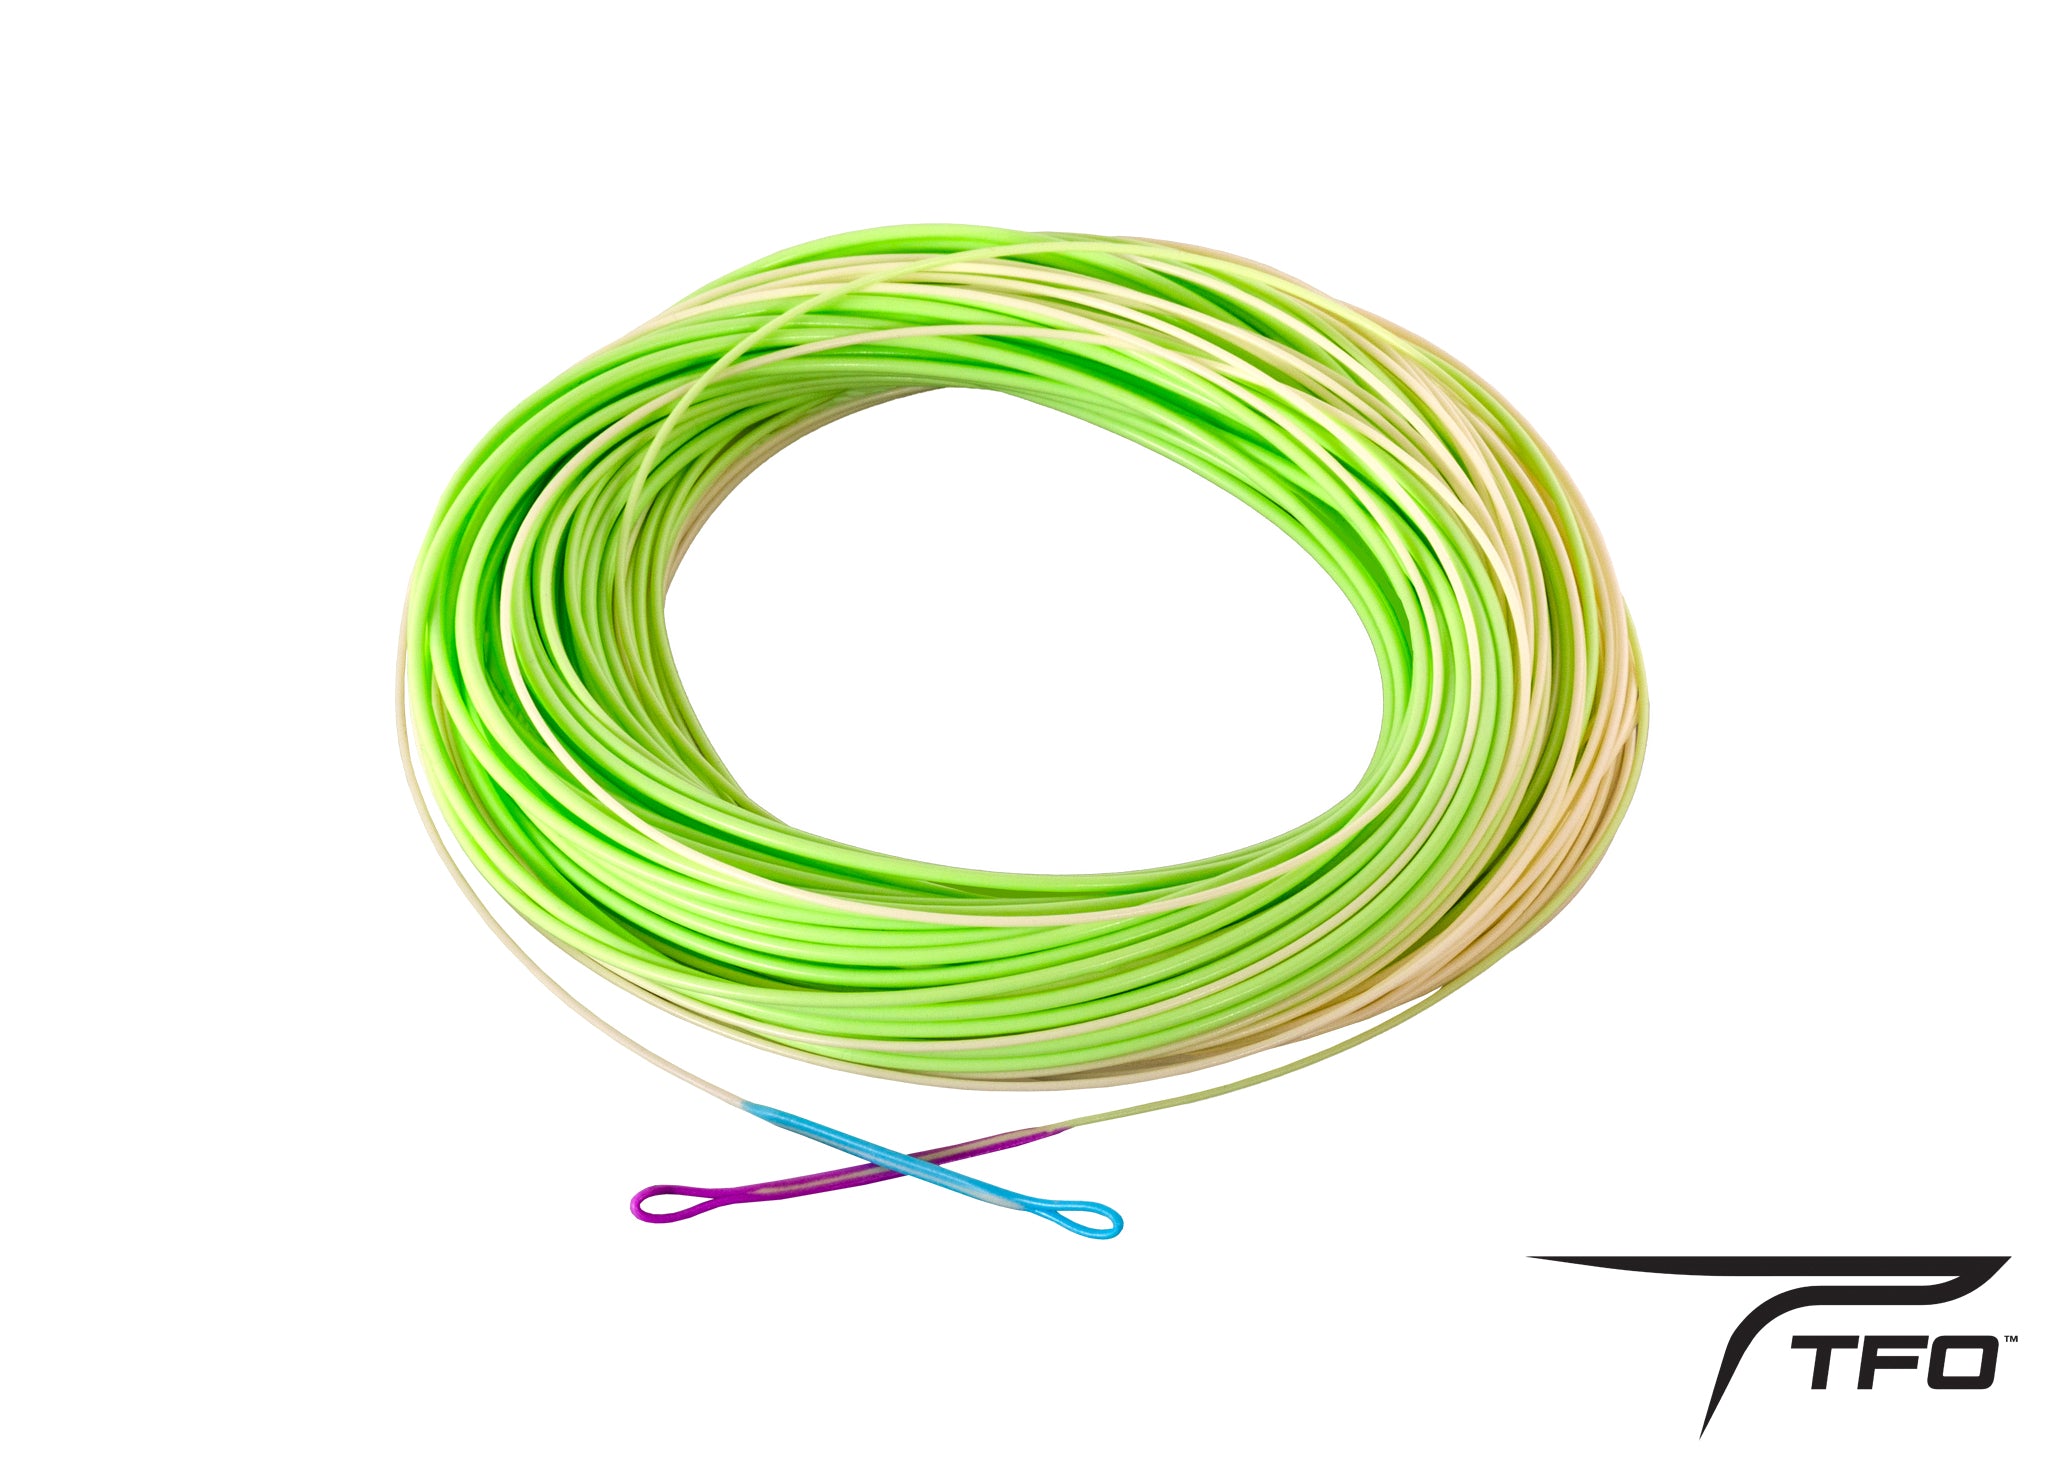 TFO Special Delivery Plus Weight Forward Floating Fly Lines, Gear